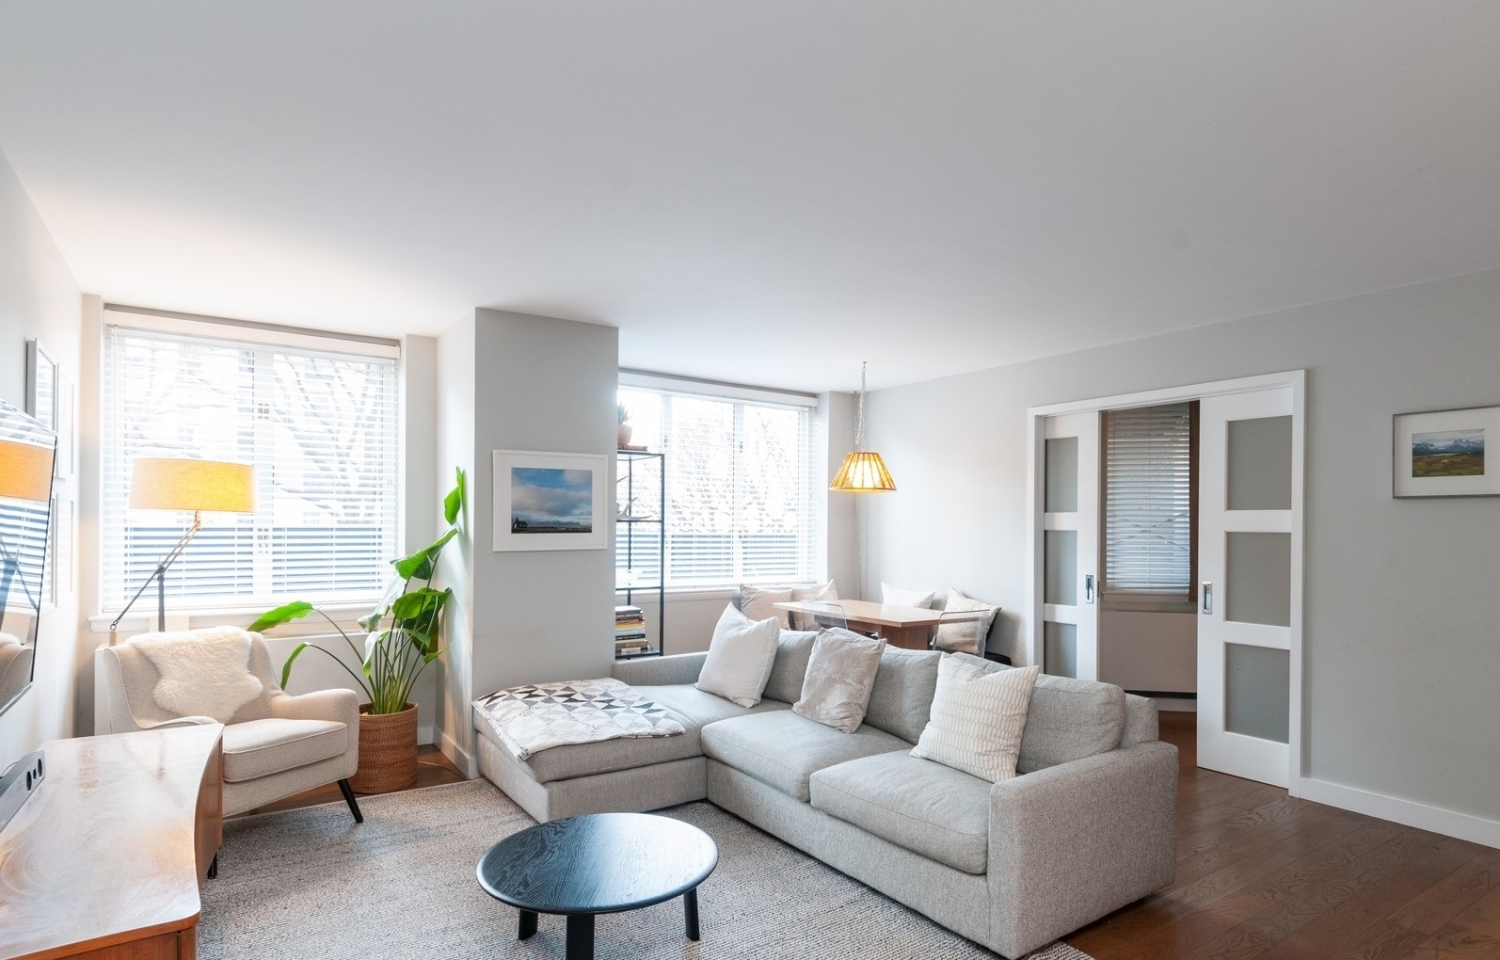 225 Rector Place 2E, Battery Park City, Downtown, NYC - 2 Bedrooms  
1 Bathrooms  
4 Rooms - 